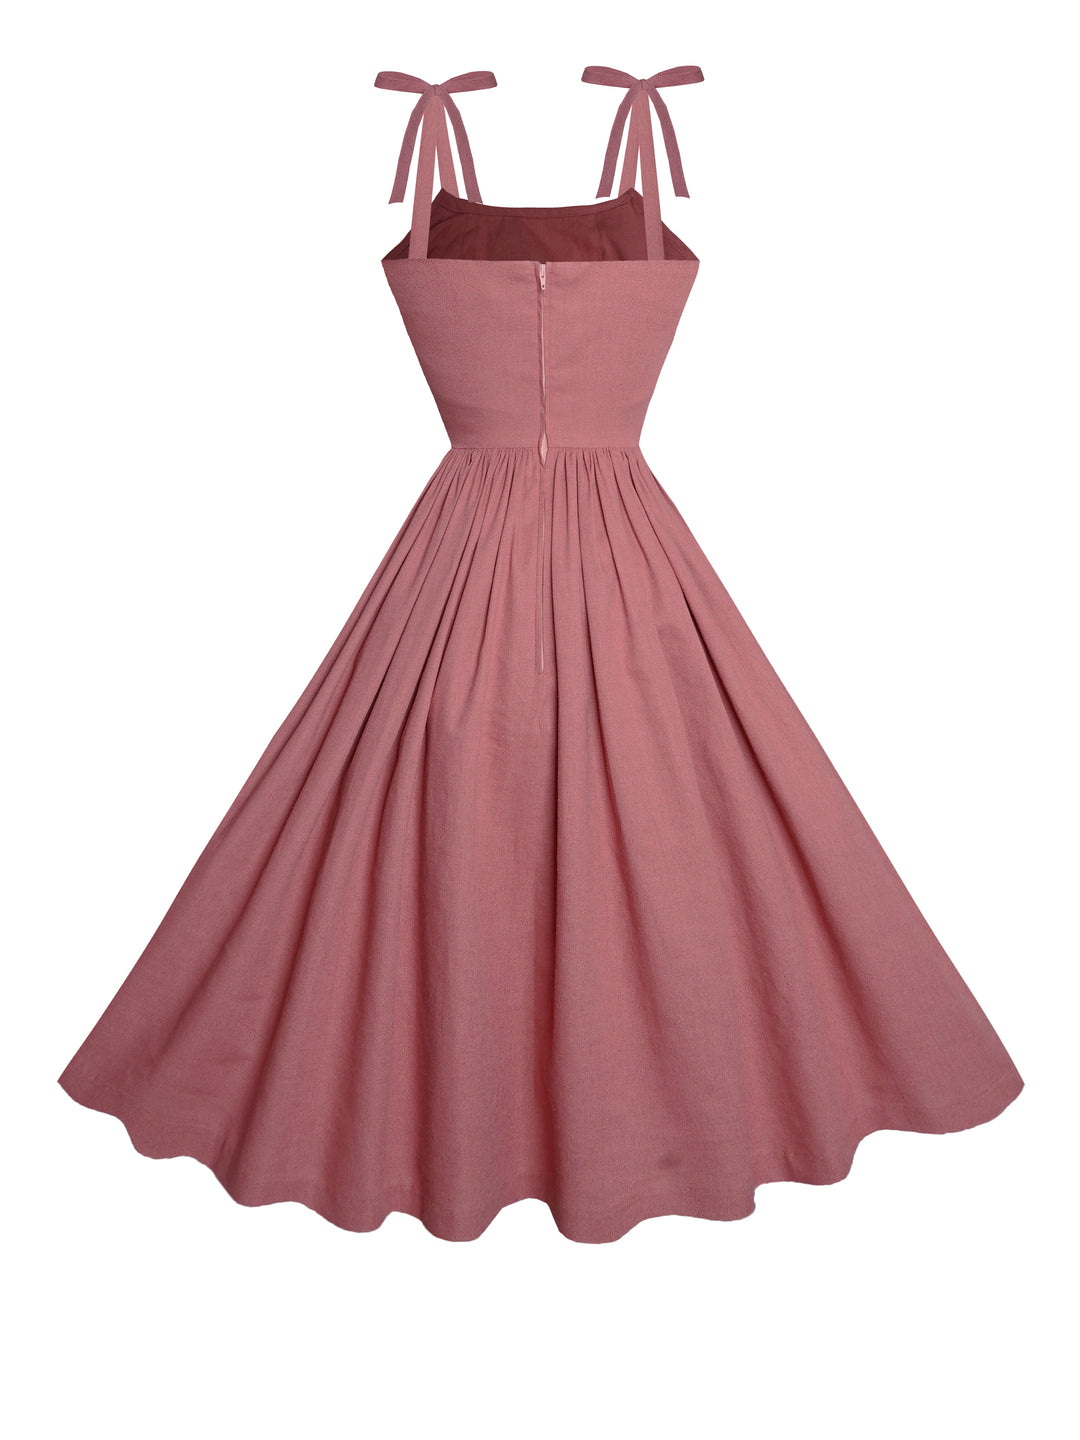 MTO - Kelly Dress in Antique Rose Linen